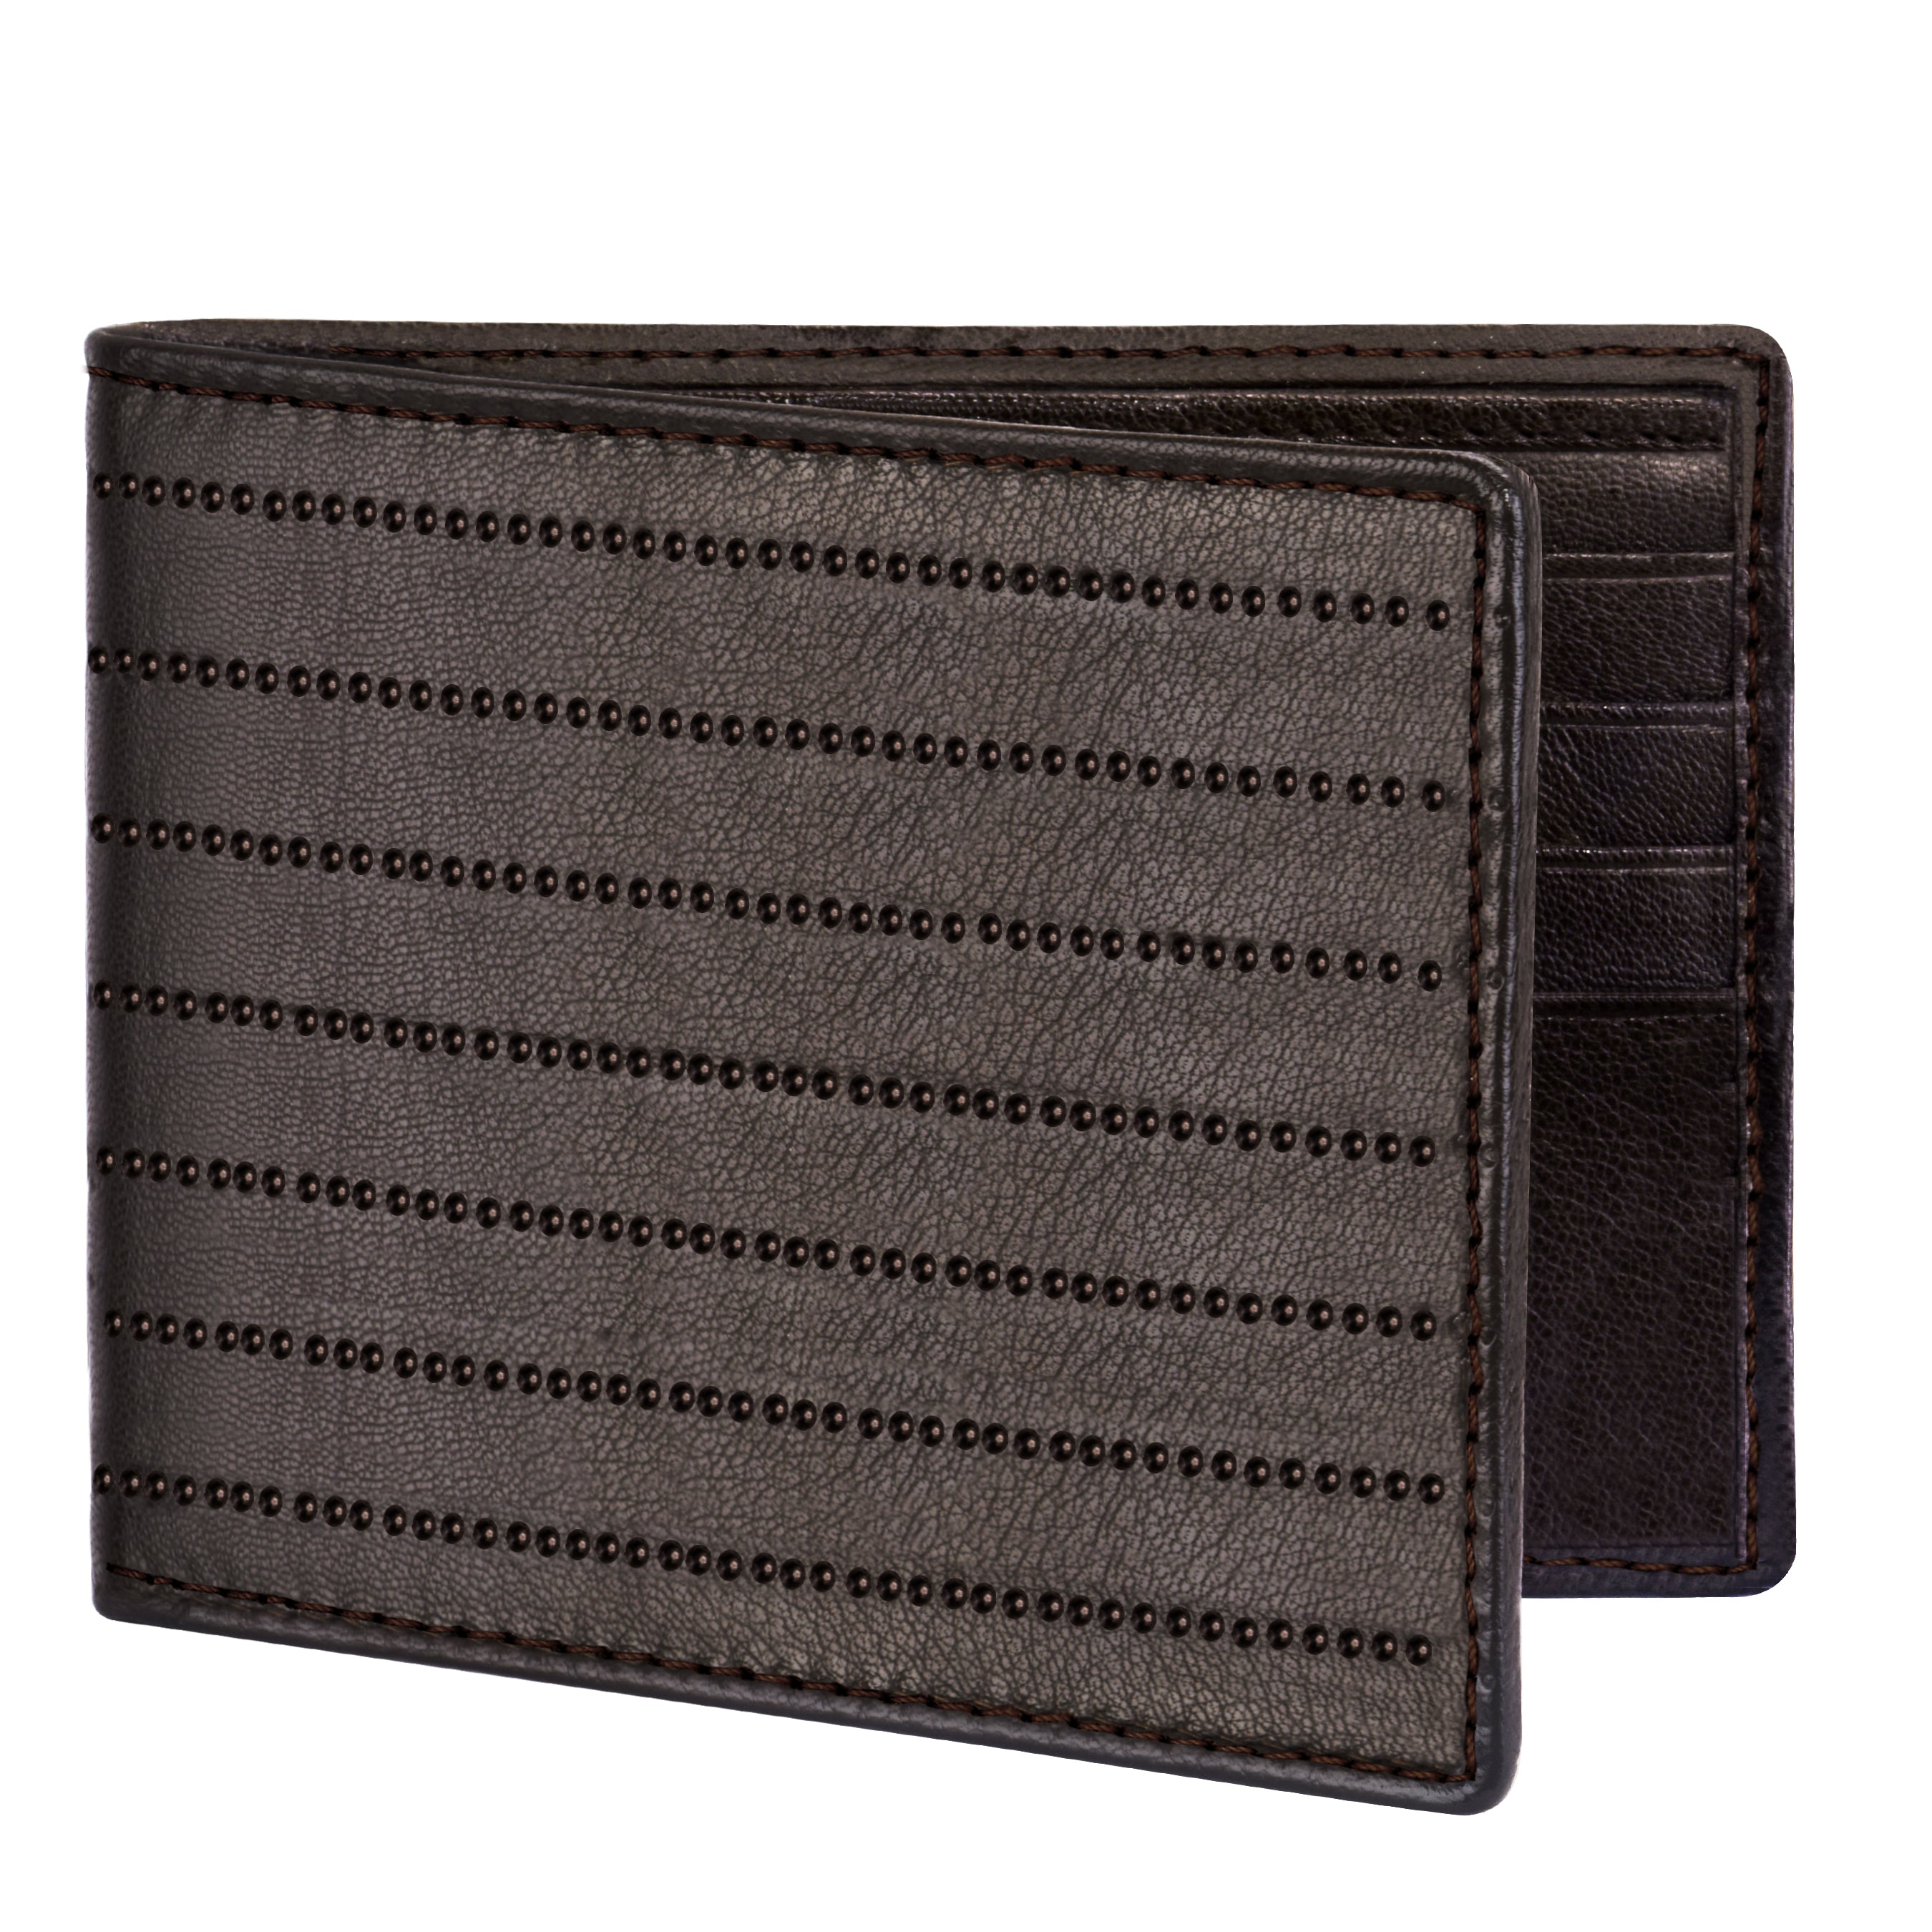 Genuine Leather Wallet for Men Coin Pocket With Zepper Closure